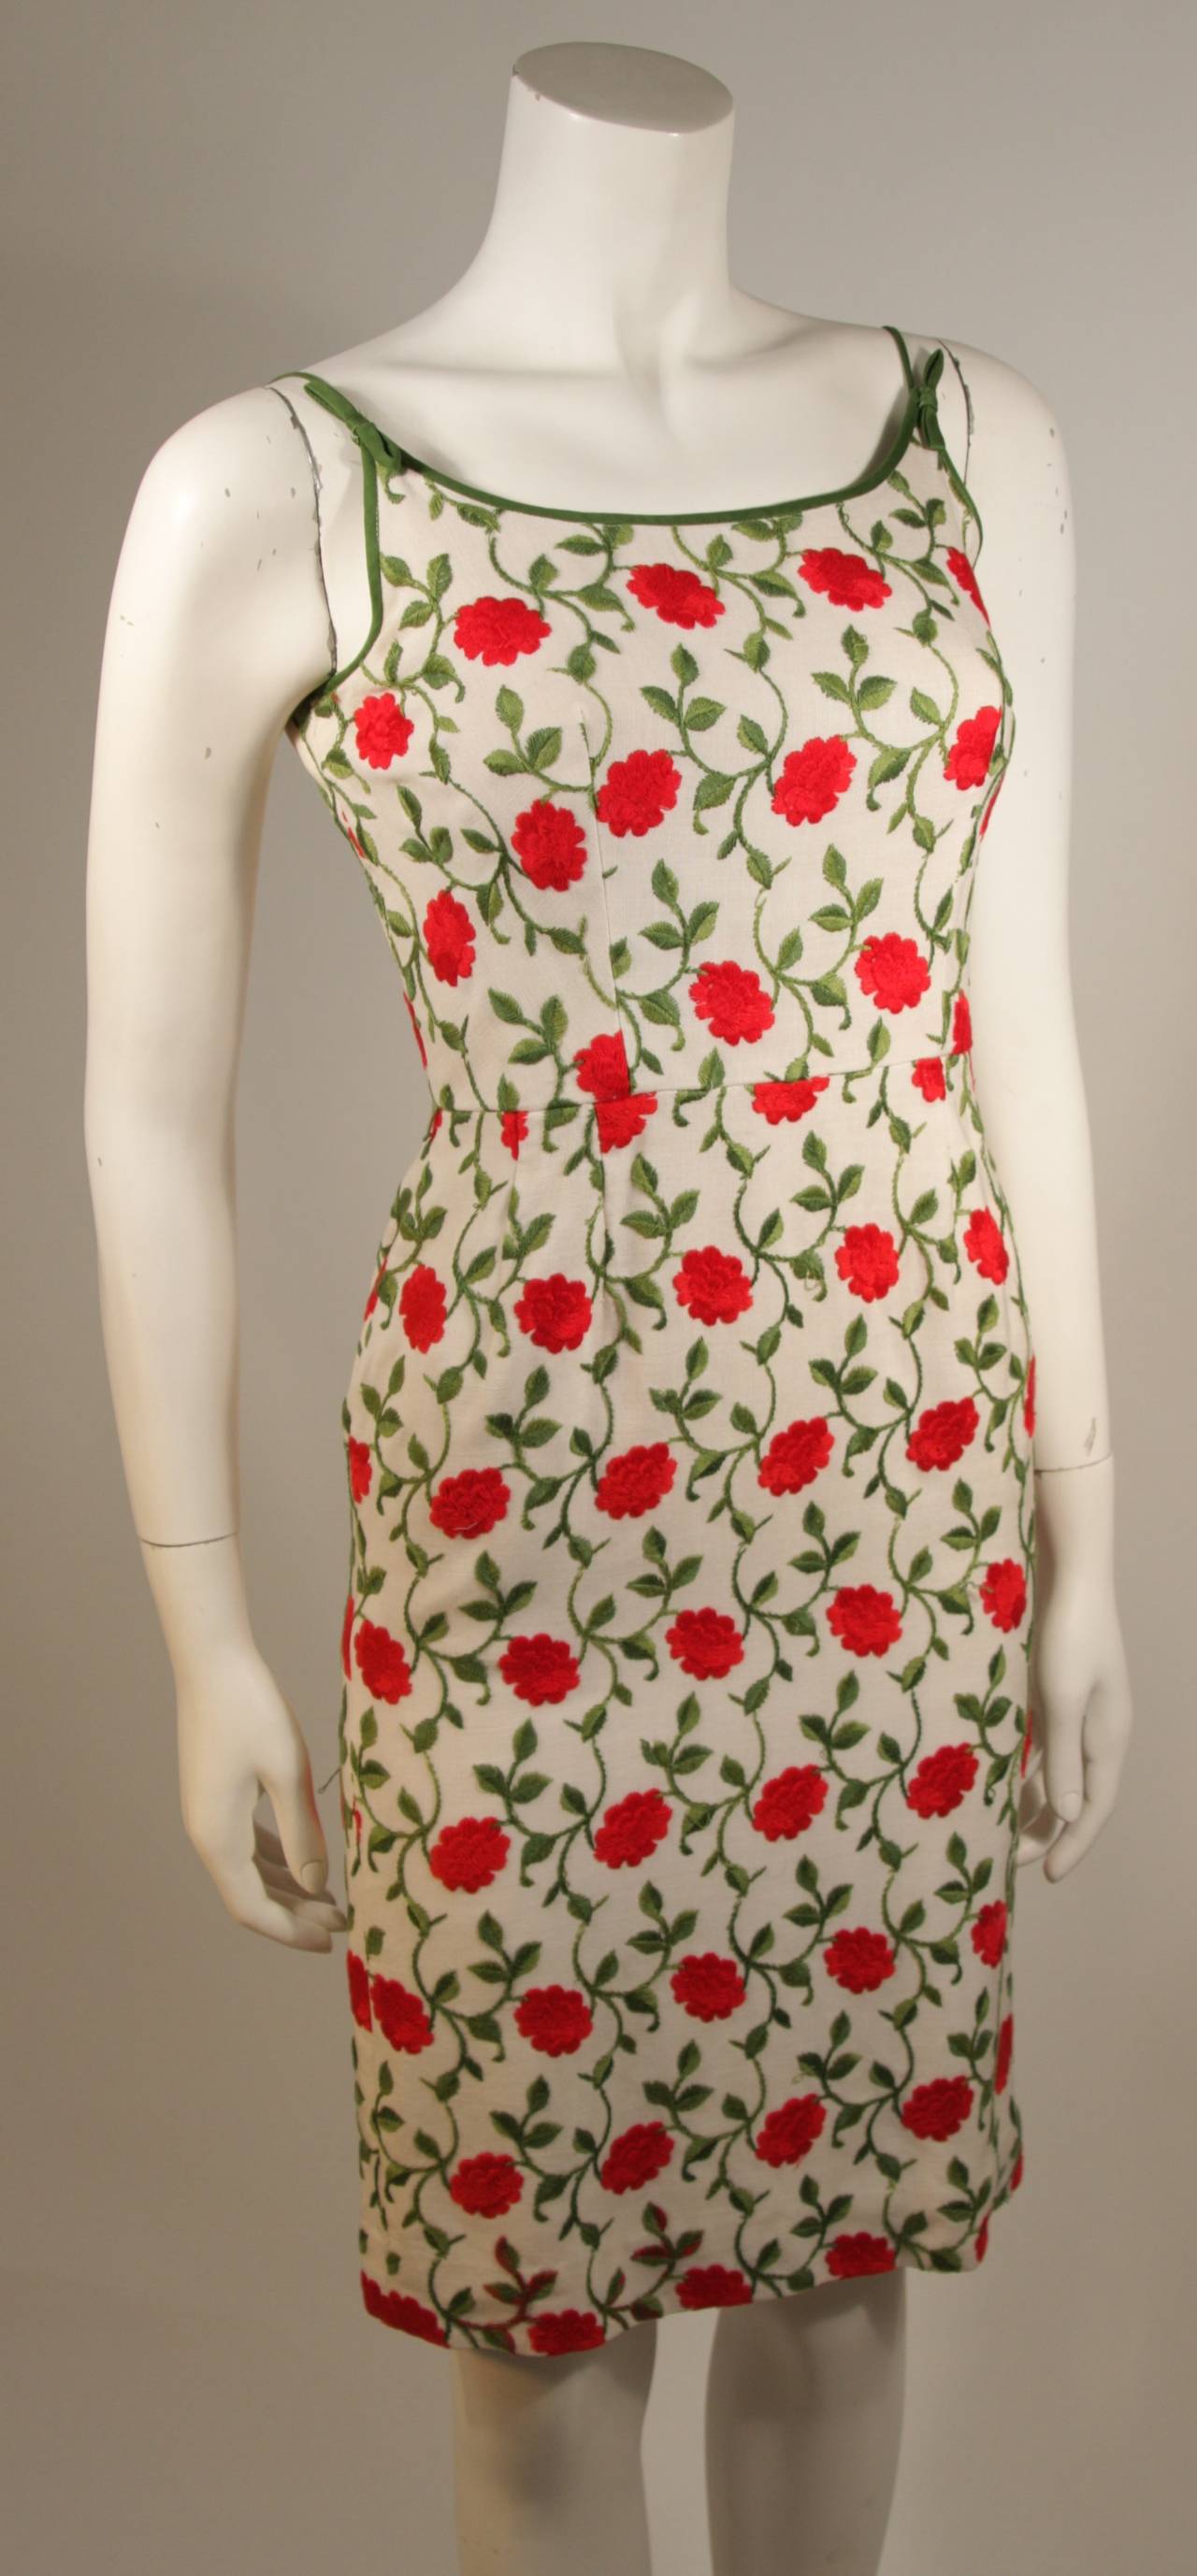 red floral embroidered dress